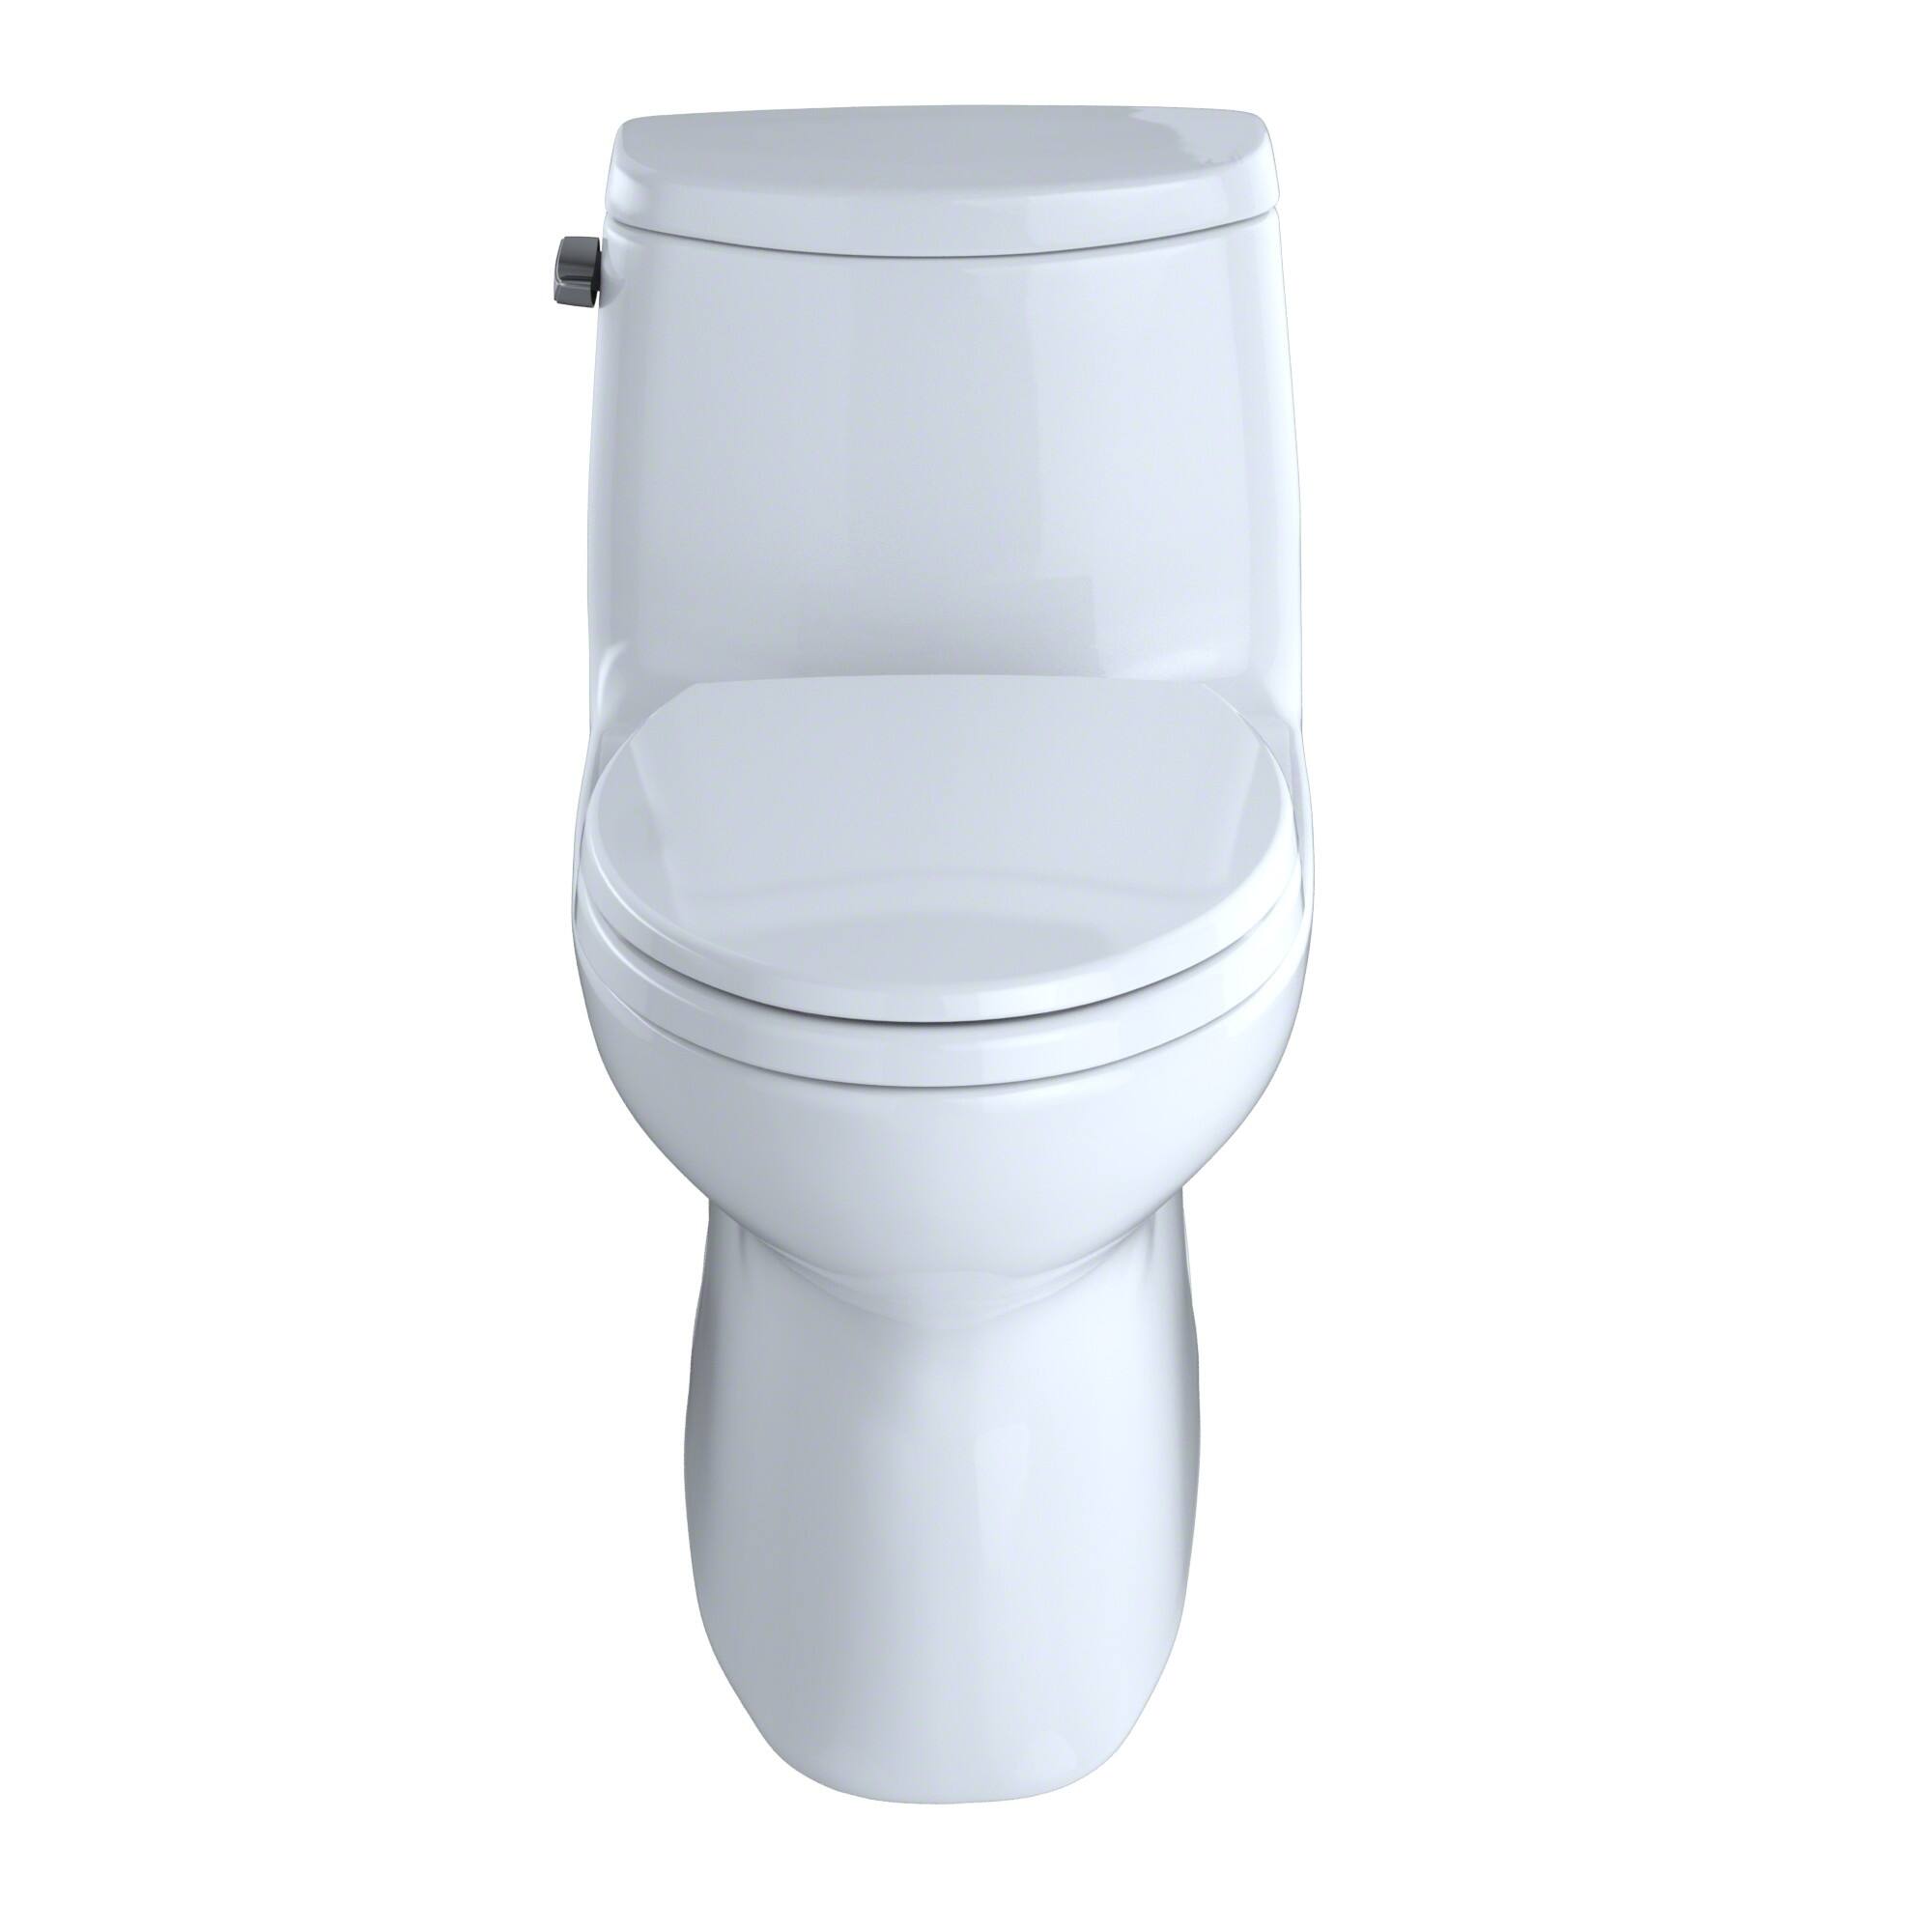 Toto Carlyle II 1-Piece Elongated 1.28 GPF Toilet 